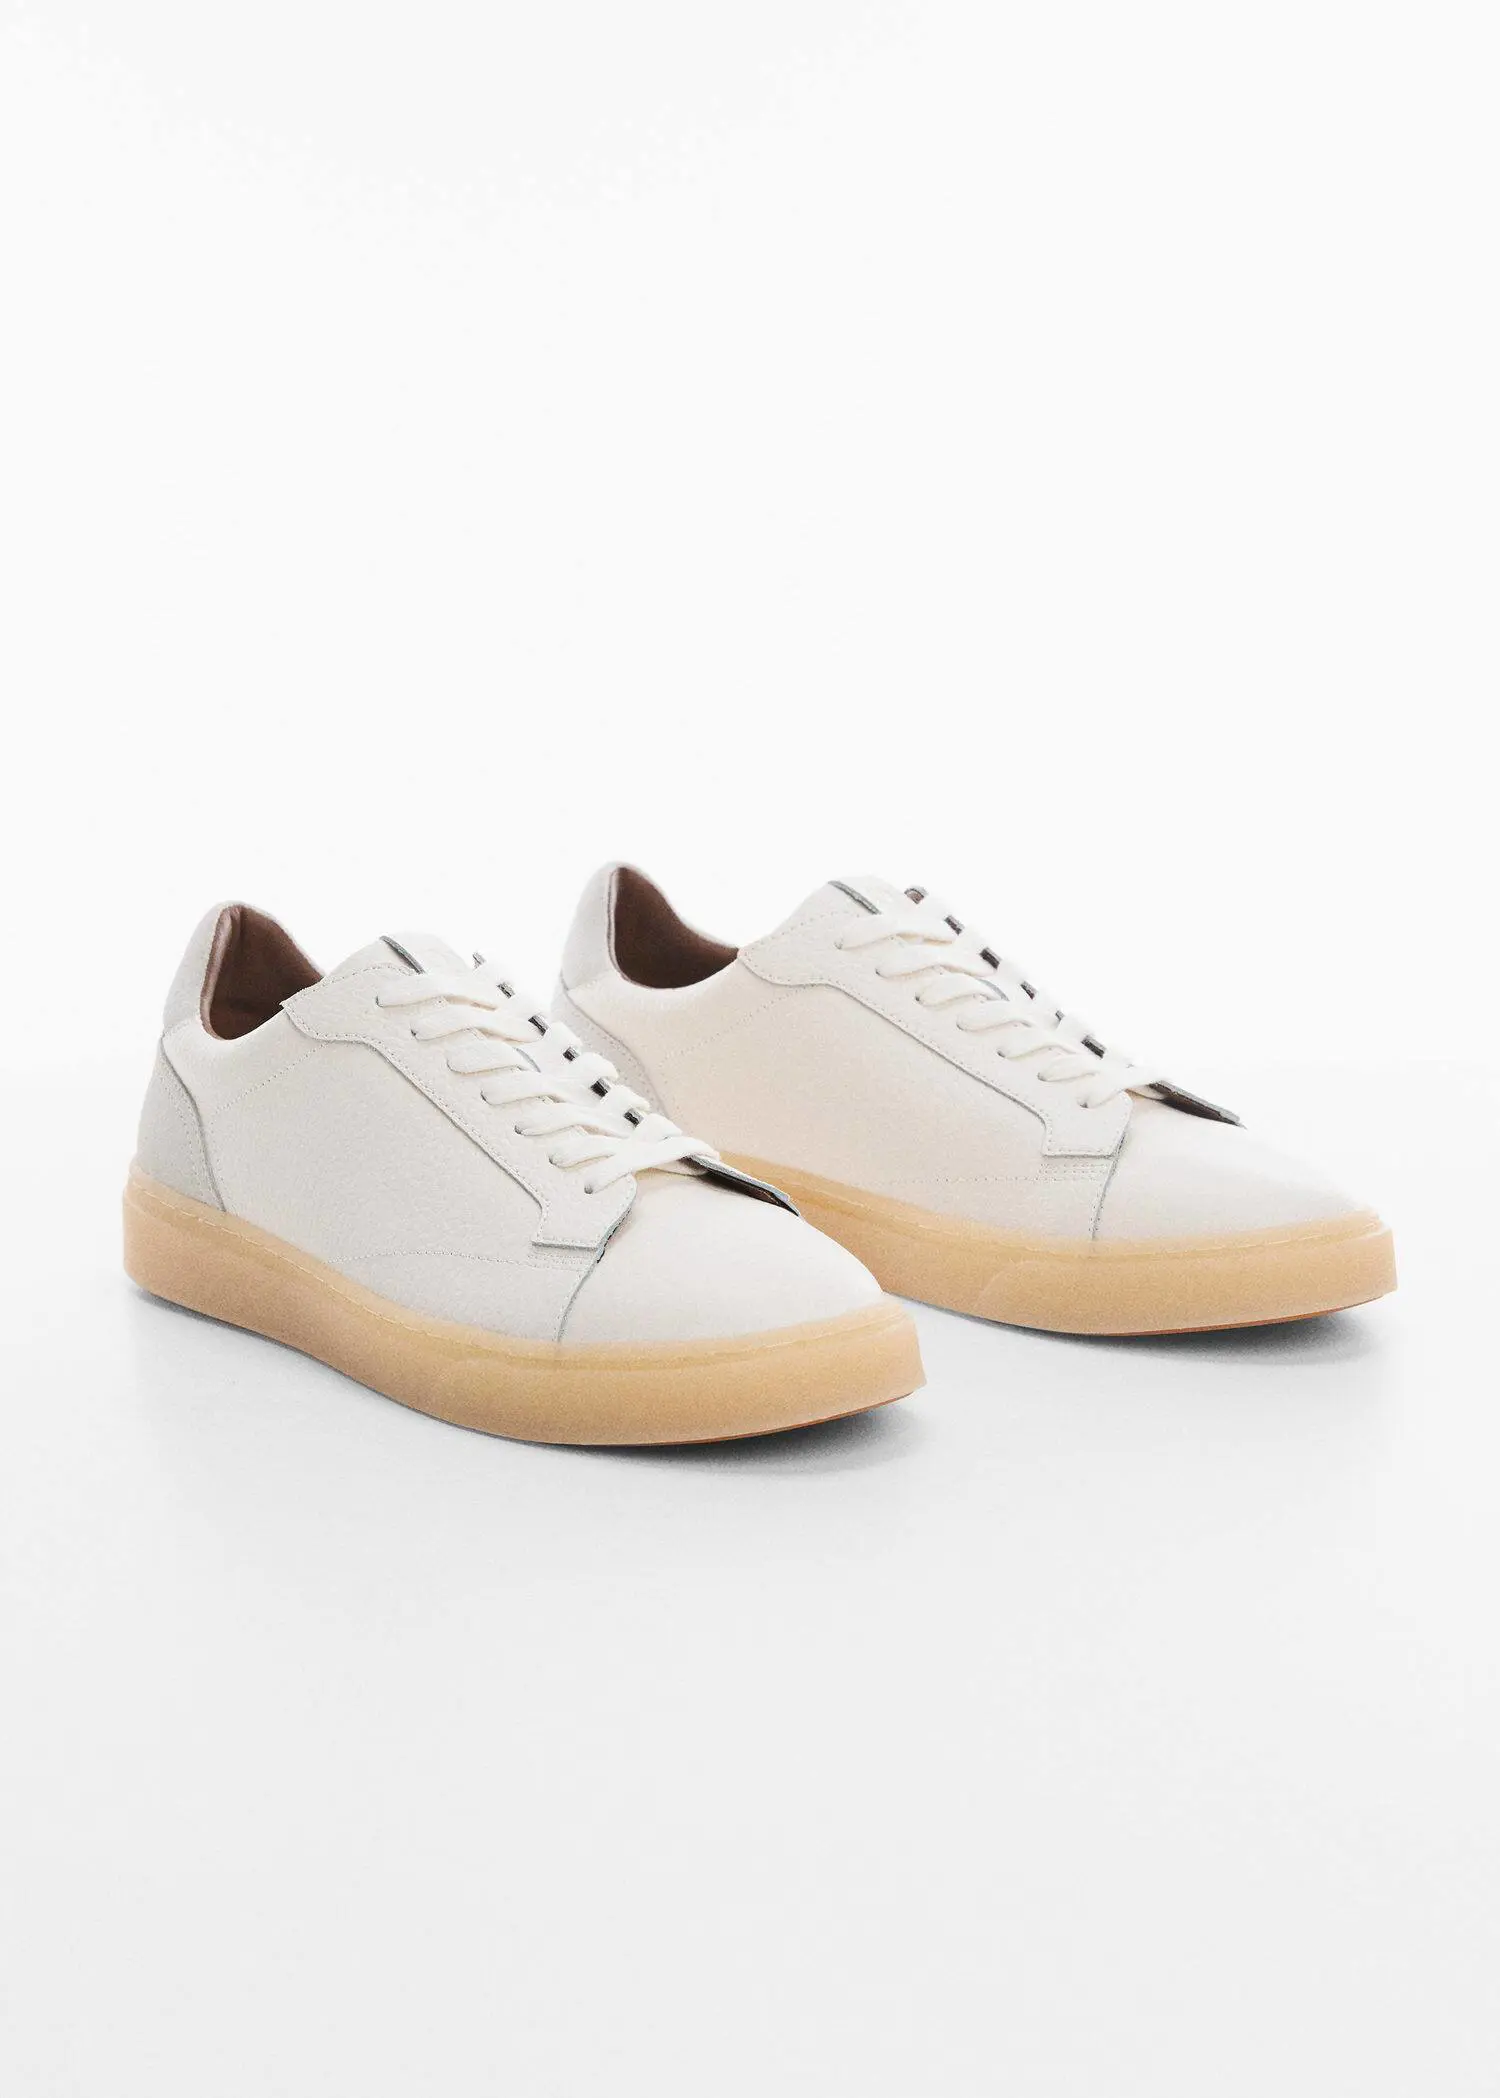 Mango Nappa leather sneakers. a pair of white sneakers with a wooden sole. 